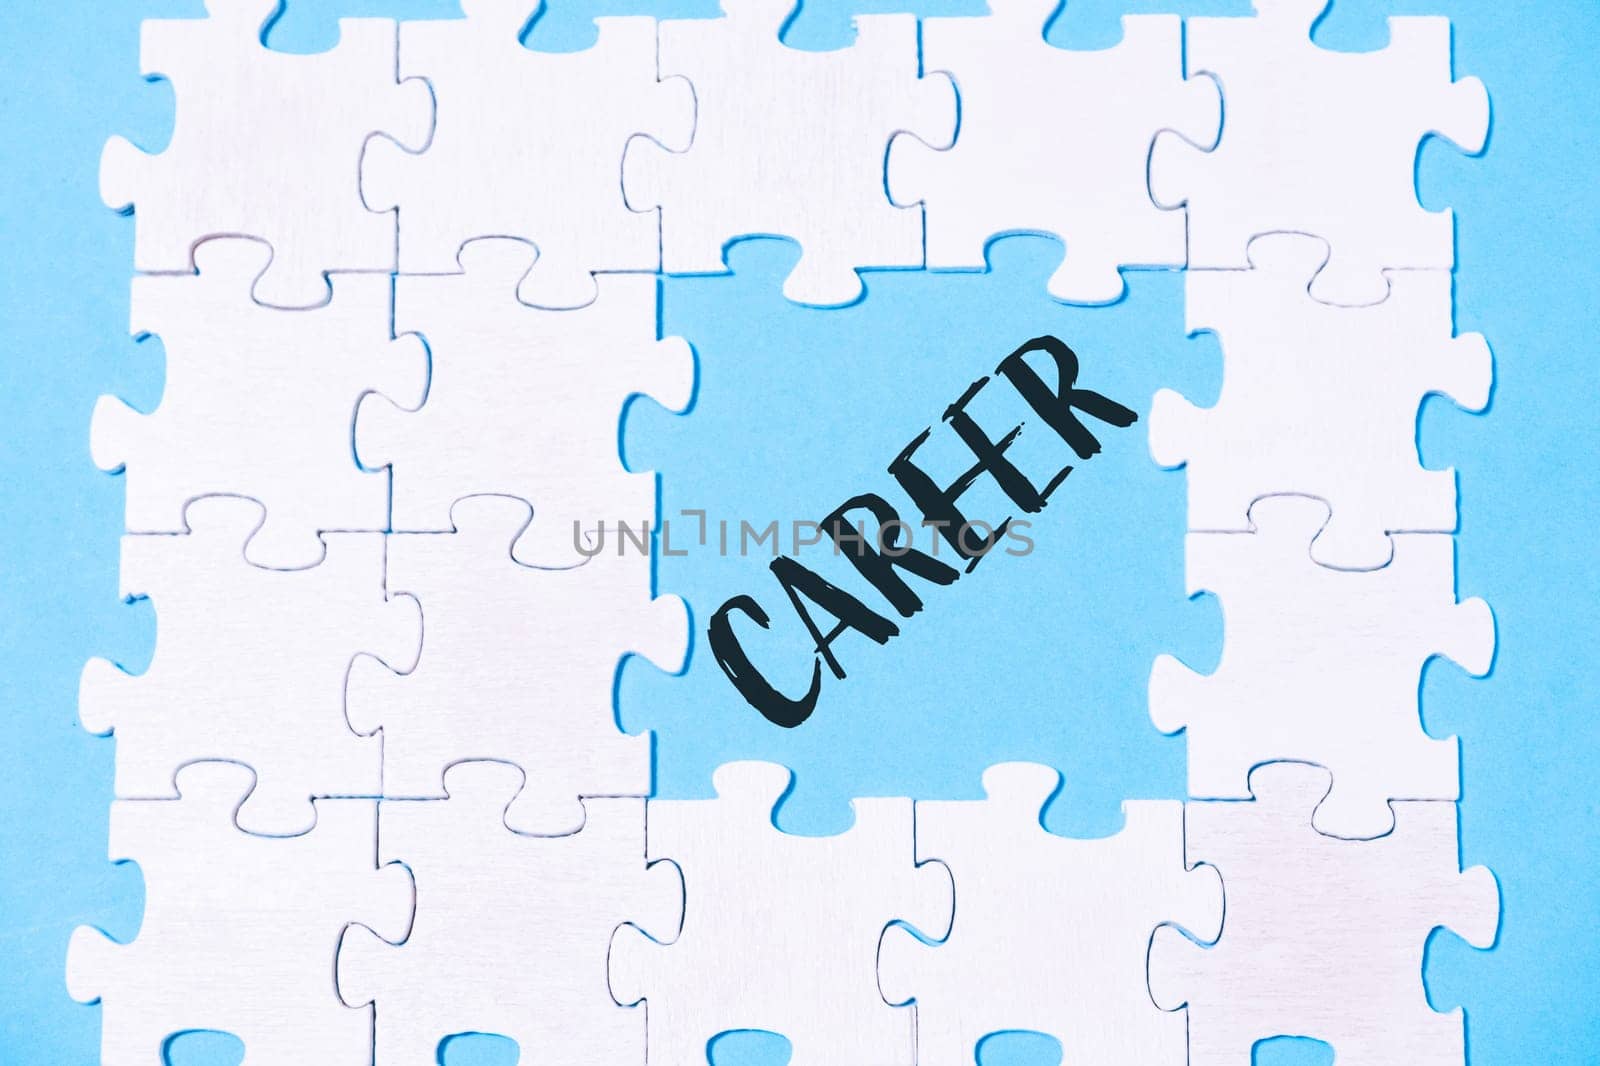 A jigsaw puzzle with the word career written in blue. The puzzle is made up of white pieces and is scattered across the image